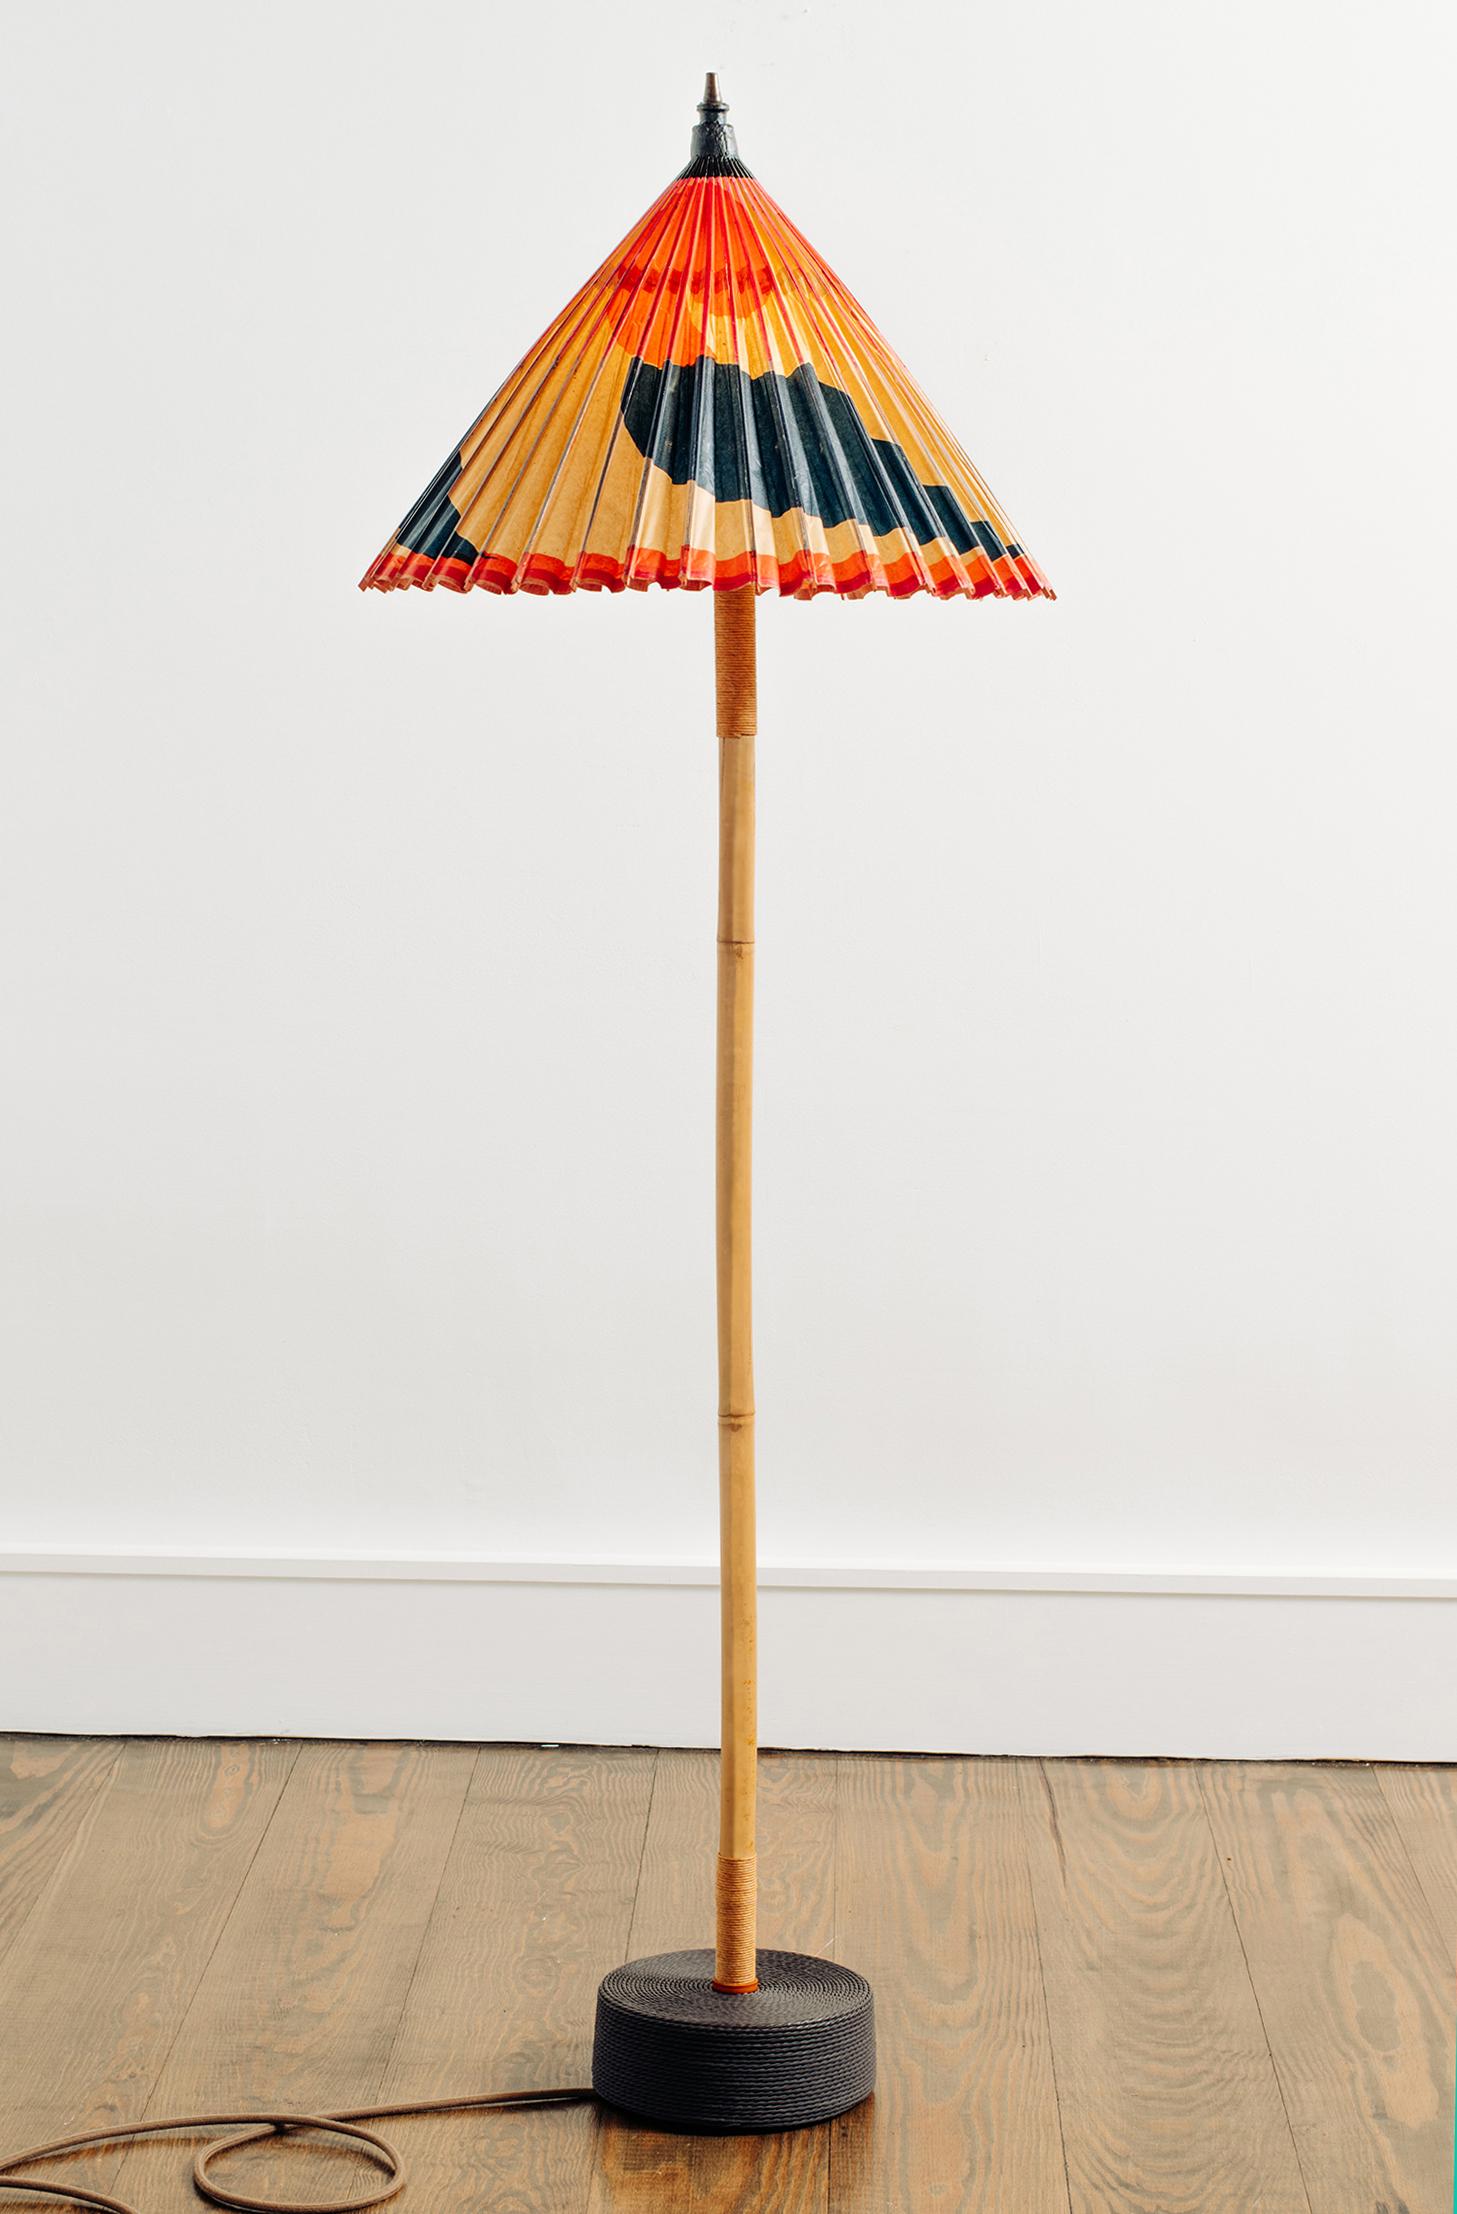 The World’s Fair Collection is a family of fixtures handmade from sustainably sourced materials and upcycled antique paper parasols given to visitors at the 20th century’s most illustrious cultural expo.

Model No. 001 features an oil-paper shade